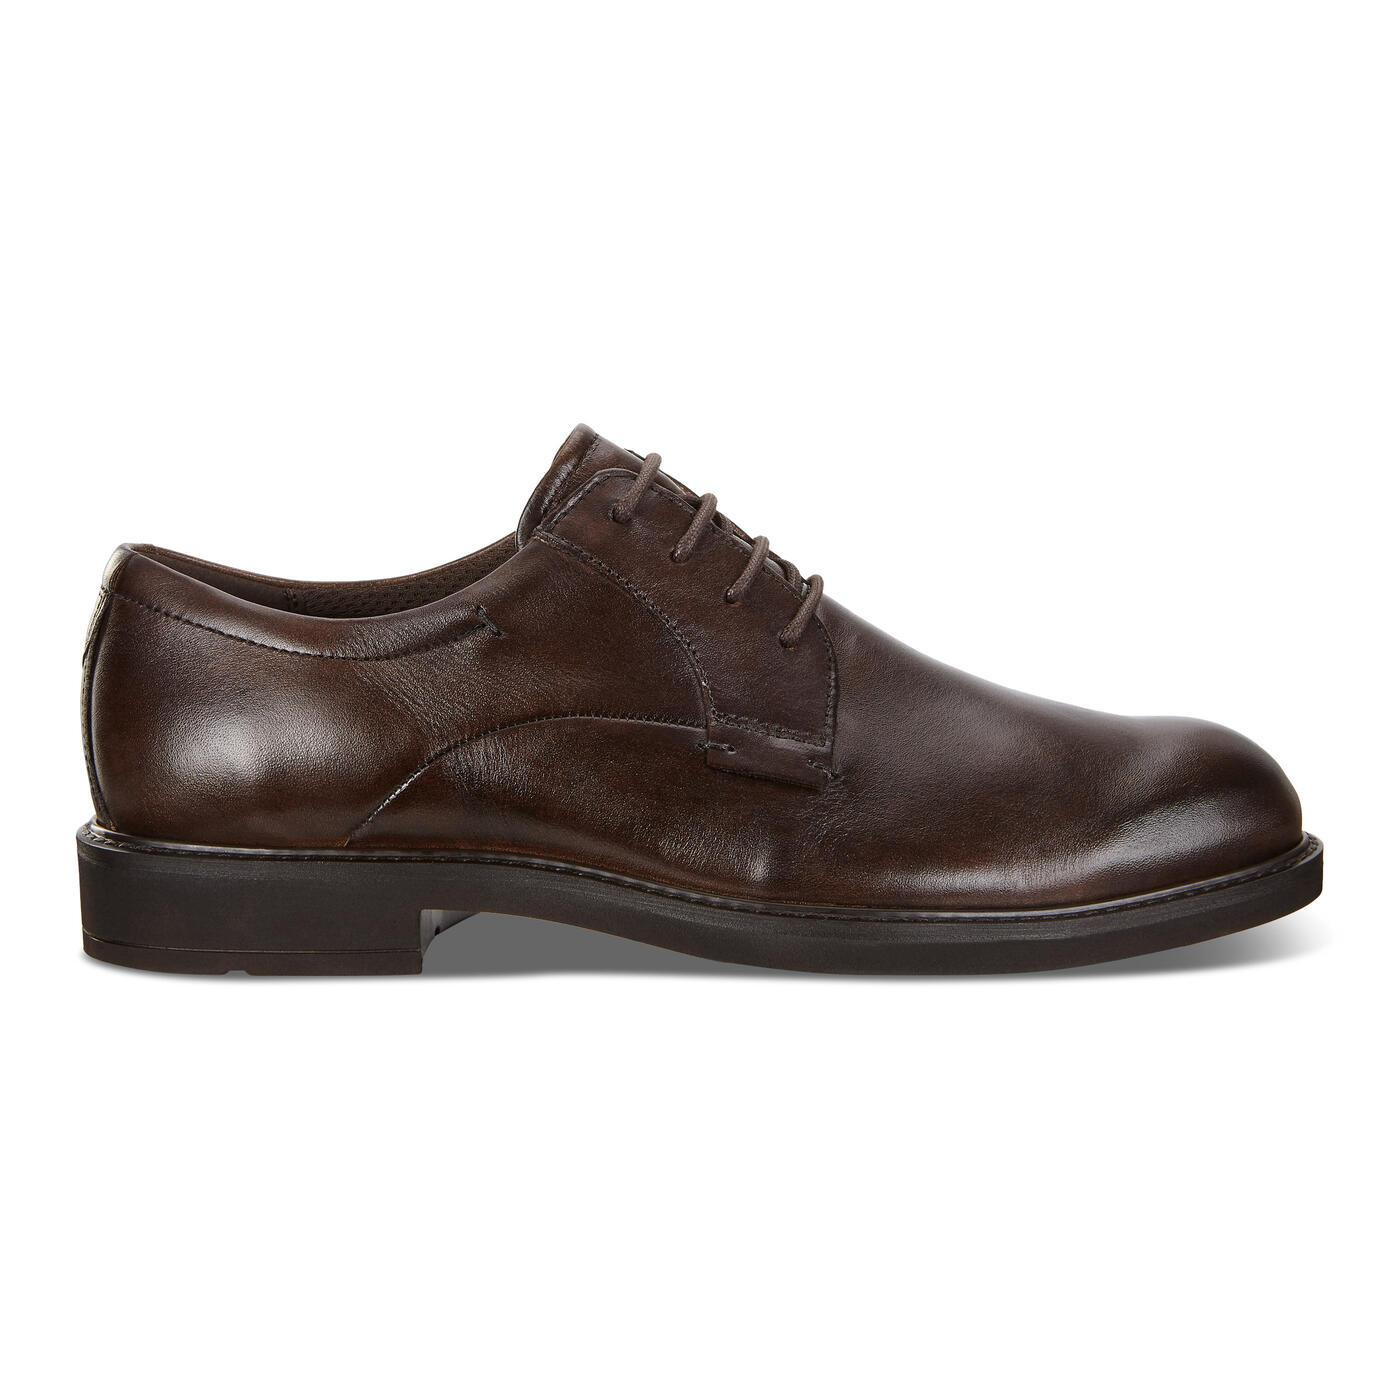 Ecco Vitrus Iii Derby Dress Shoes in Cocoa Brown (Brown) for Men - Lyst